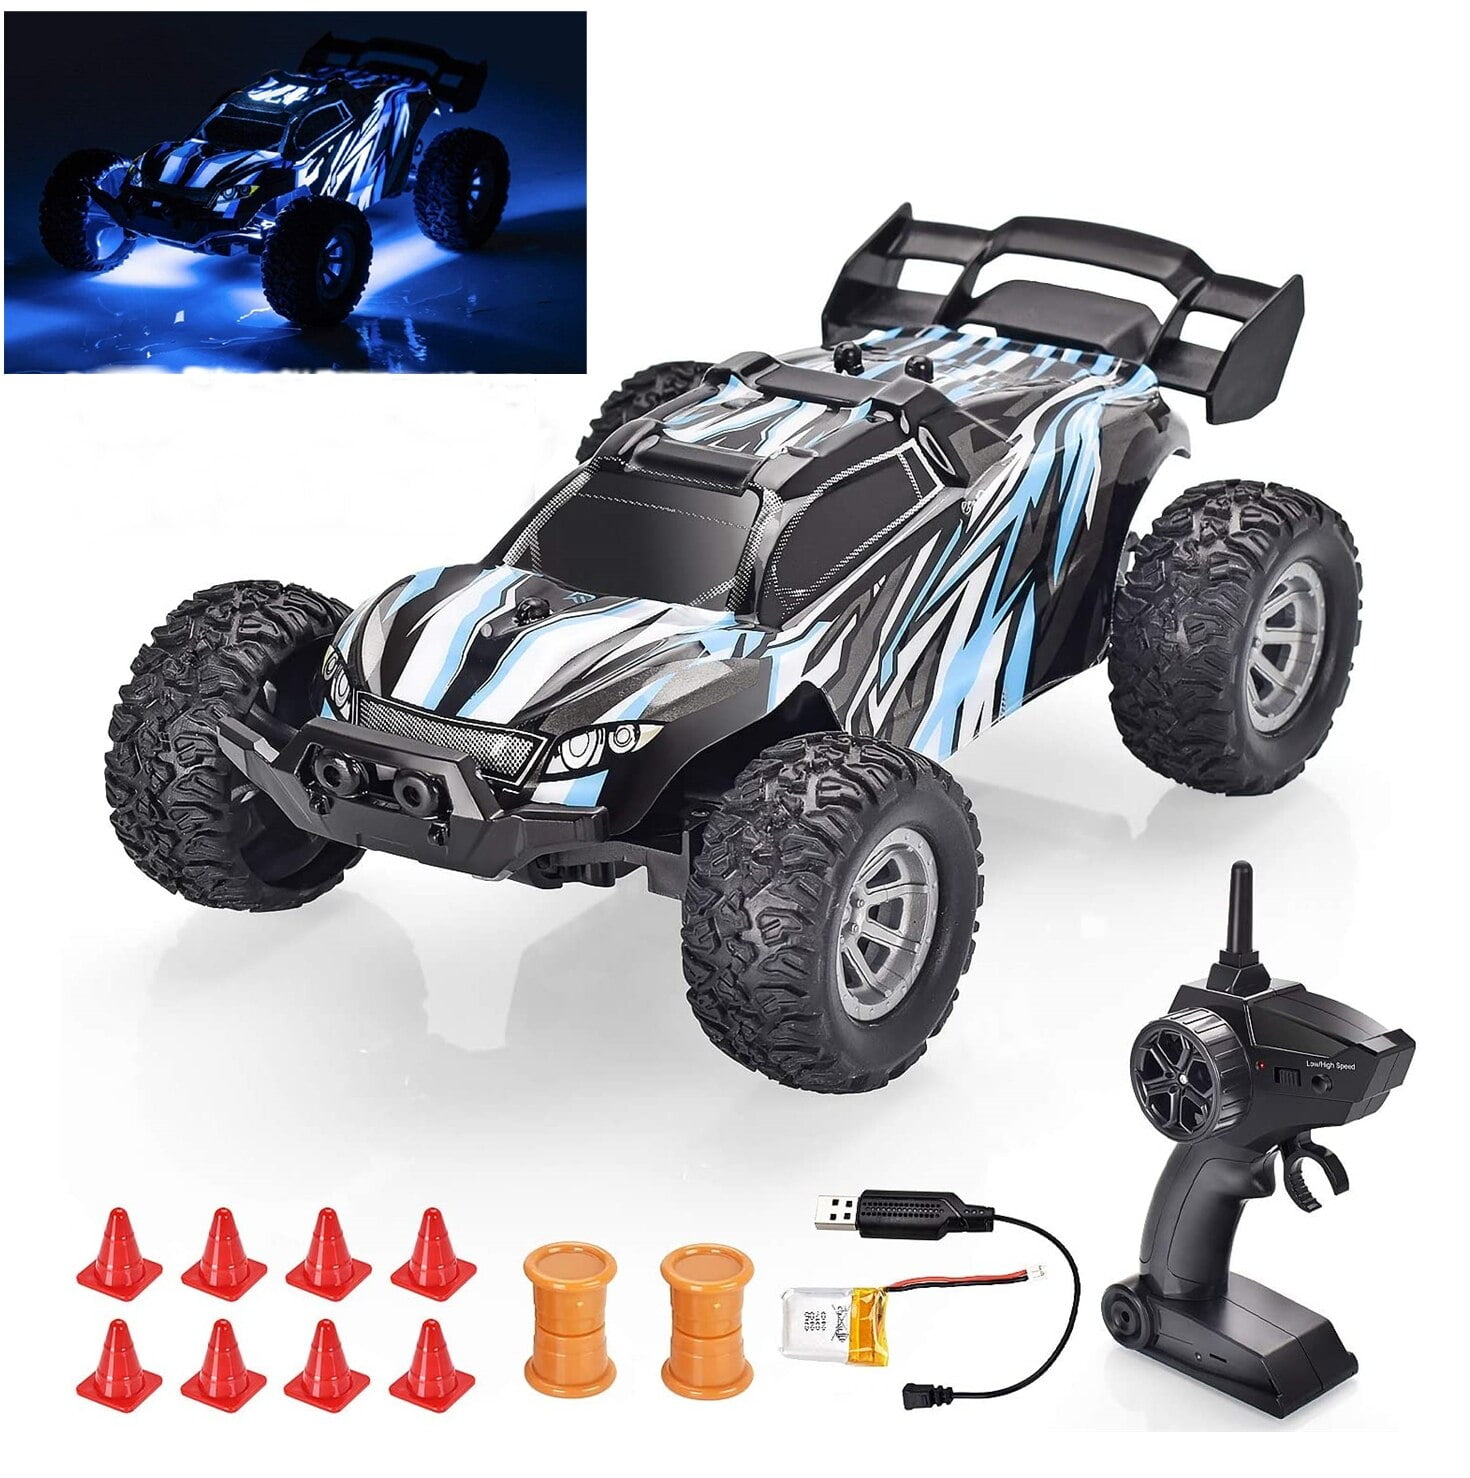 5" Mini RC Car Remote Control Rechargeable XMAS Toy Gift Black Silver MC10-03 